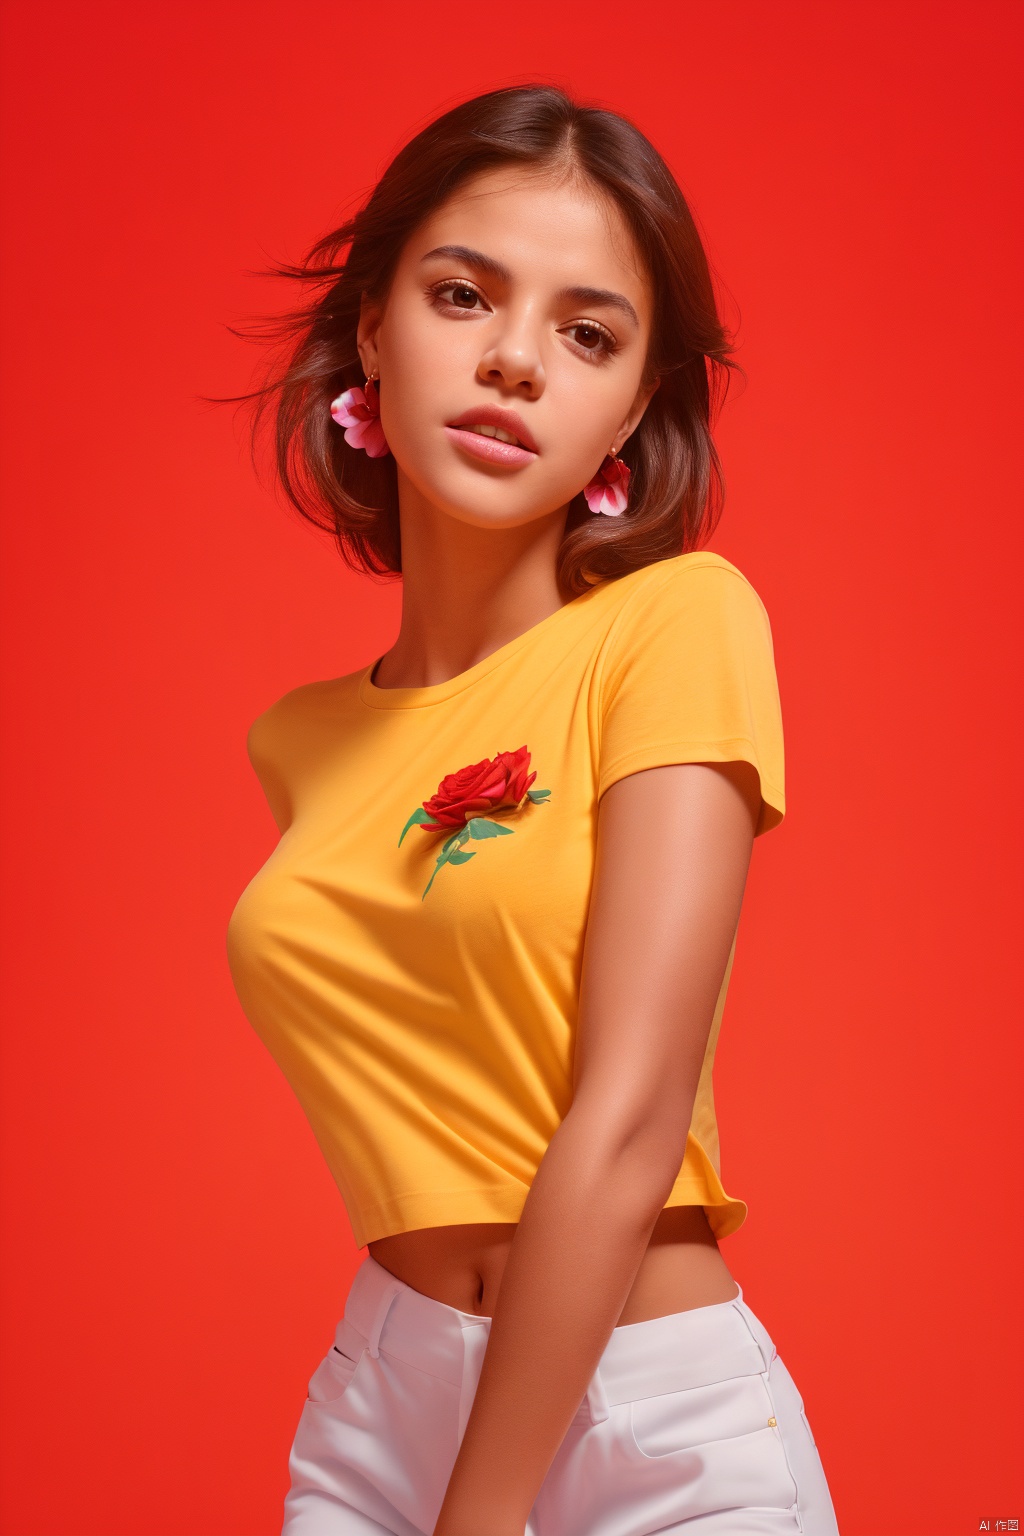  The lbc girl is wearing a yellow T-shirt and holding a big bunch of red roses, with a bust of 8k, clear details, rich facial expressions and a background sky., Hyperdetailed Photography, art painting , Nebula background, dancing